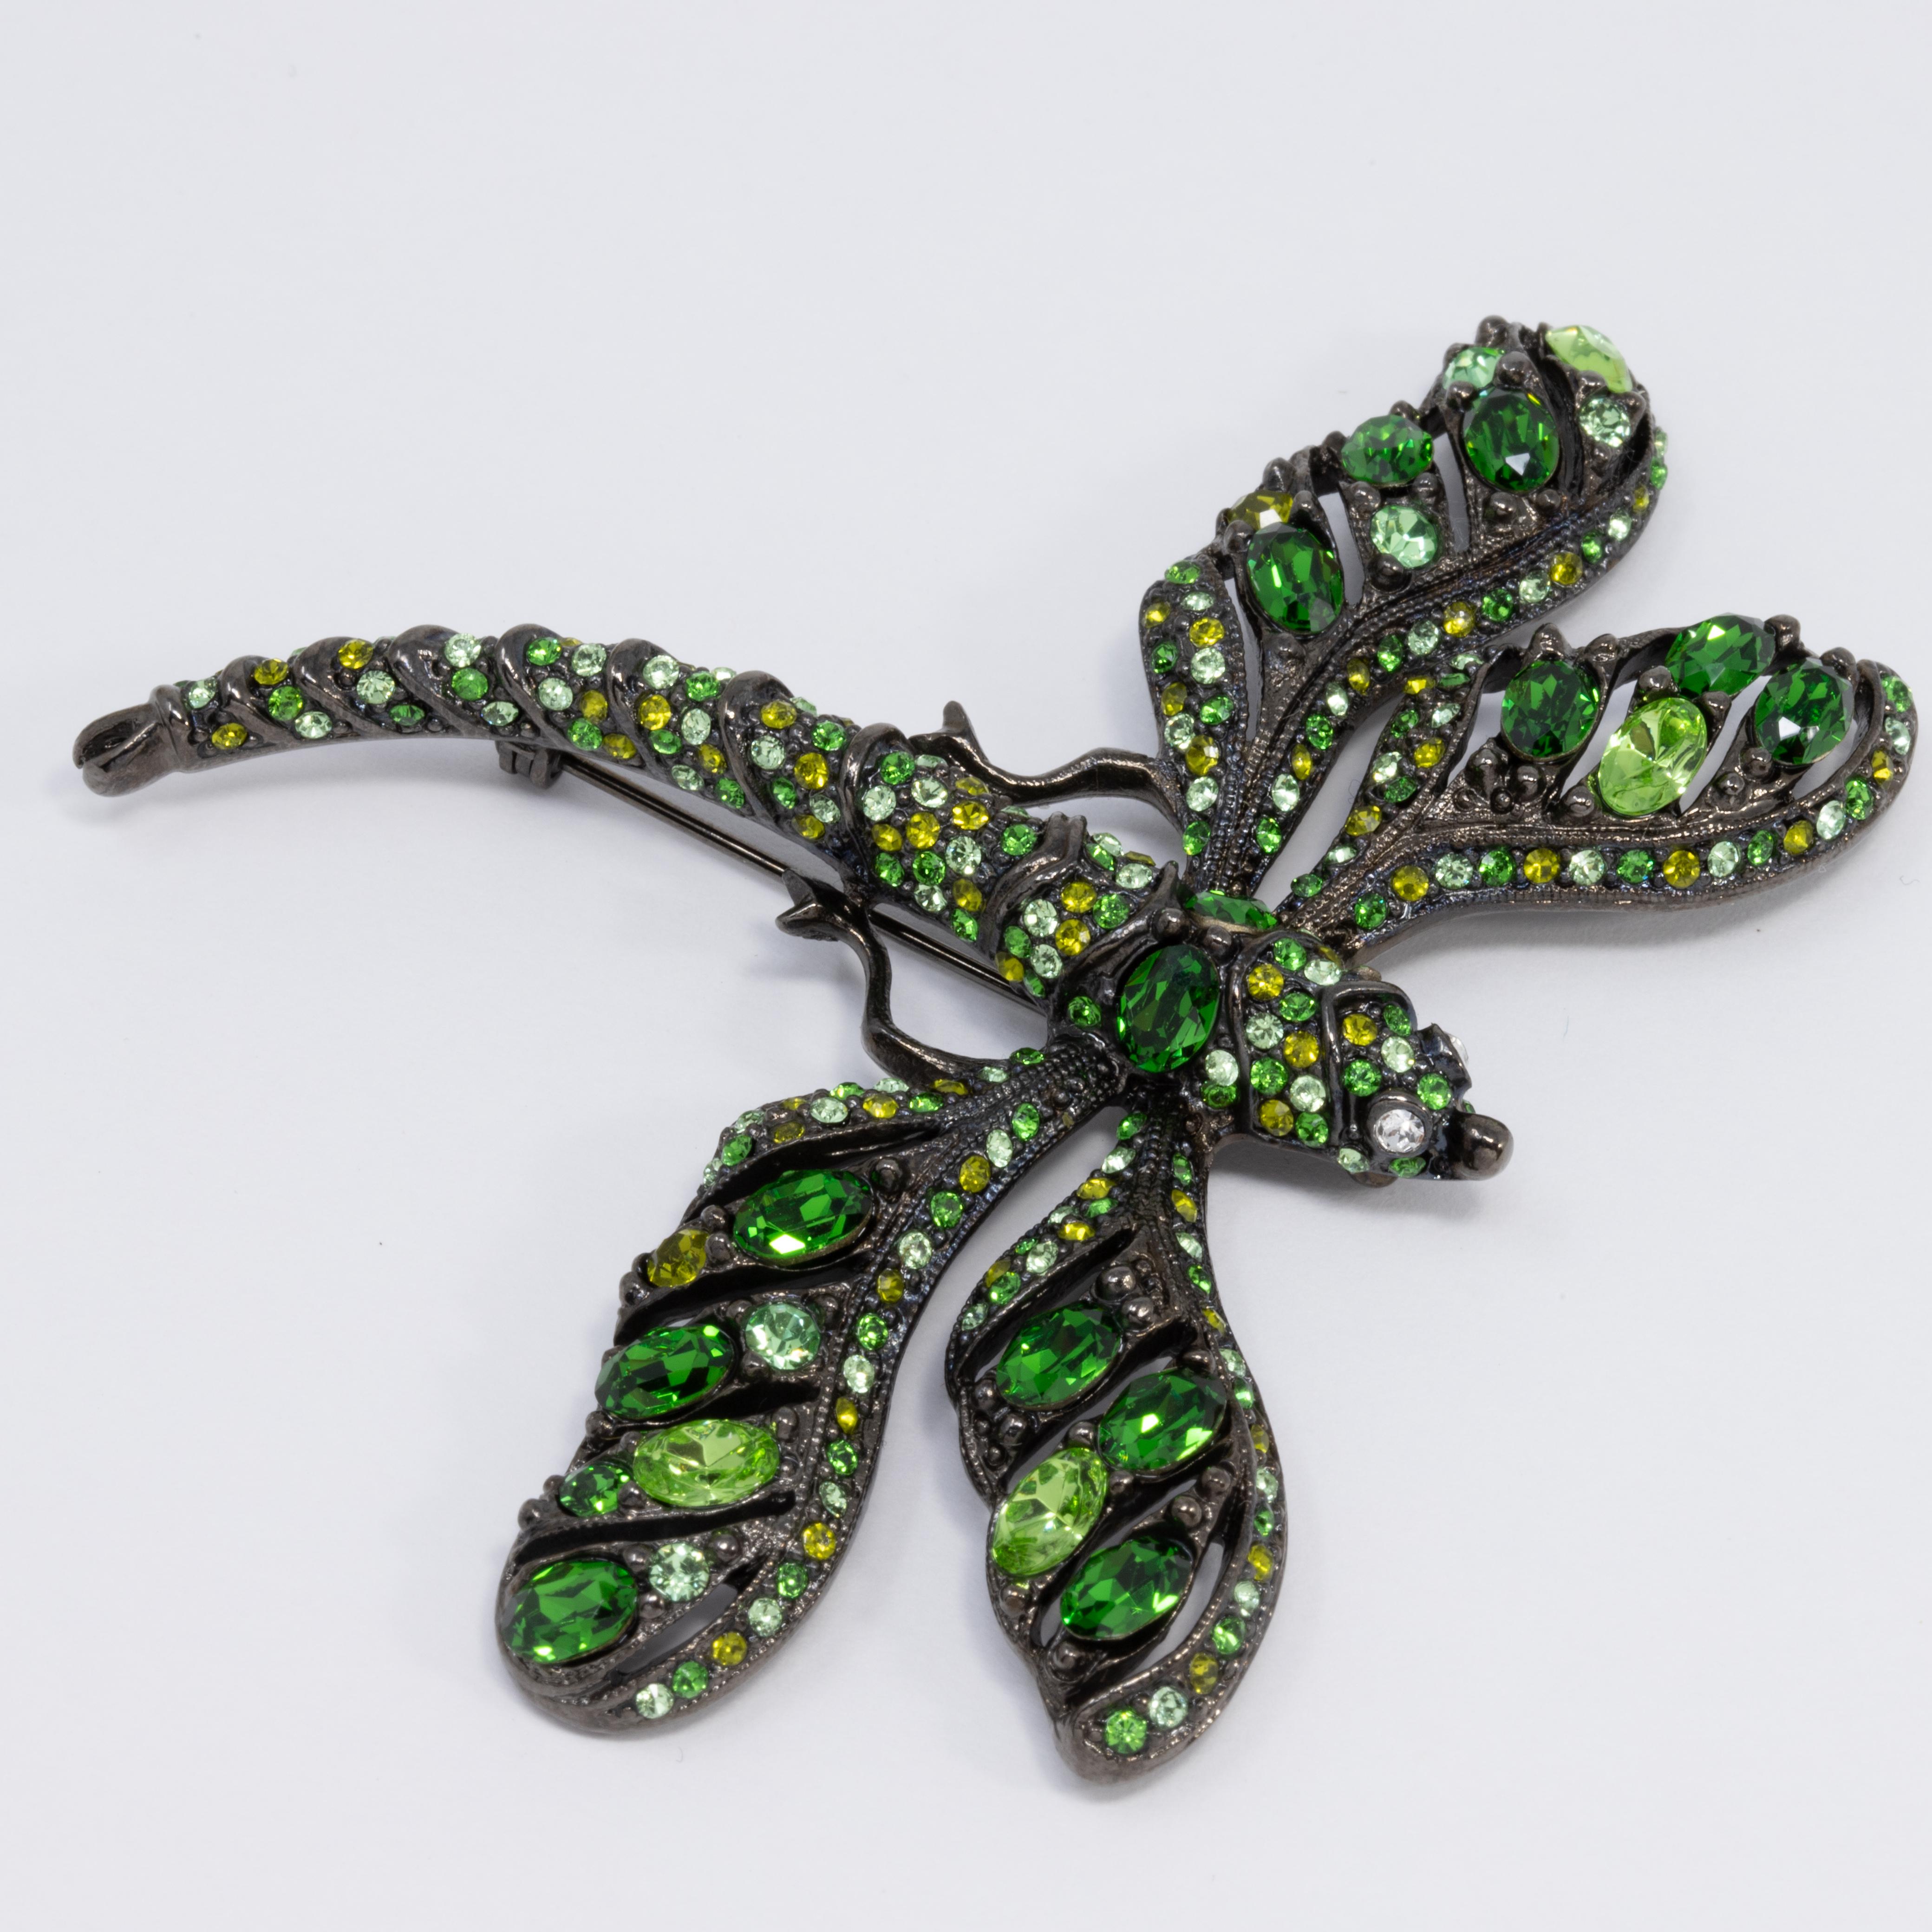 A stylish brooch by Kenneth Jay Lane! This dark gunmetal dragonfly is accented with dazzling green and yellow crystals.

Hallmarks: Kenneth © Lane